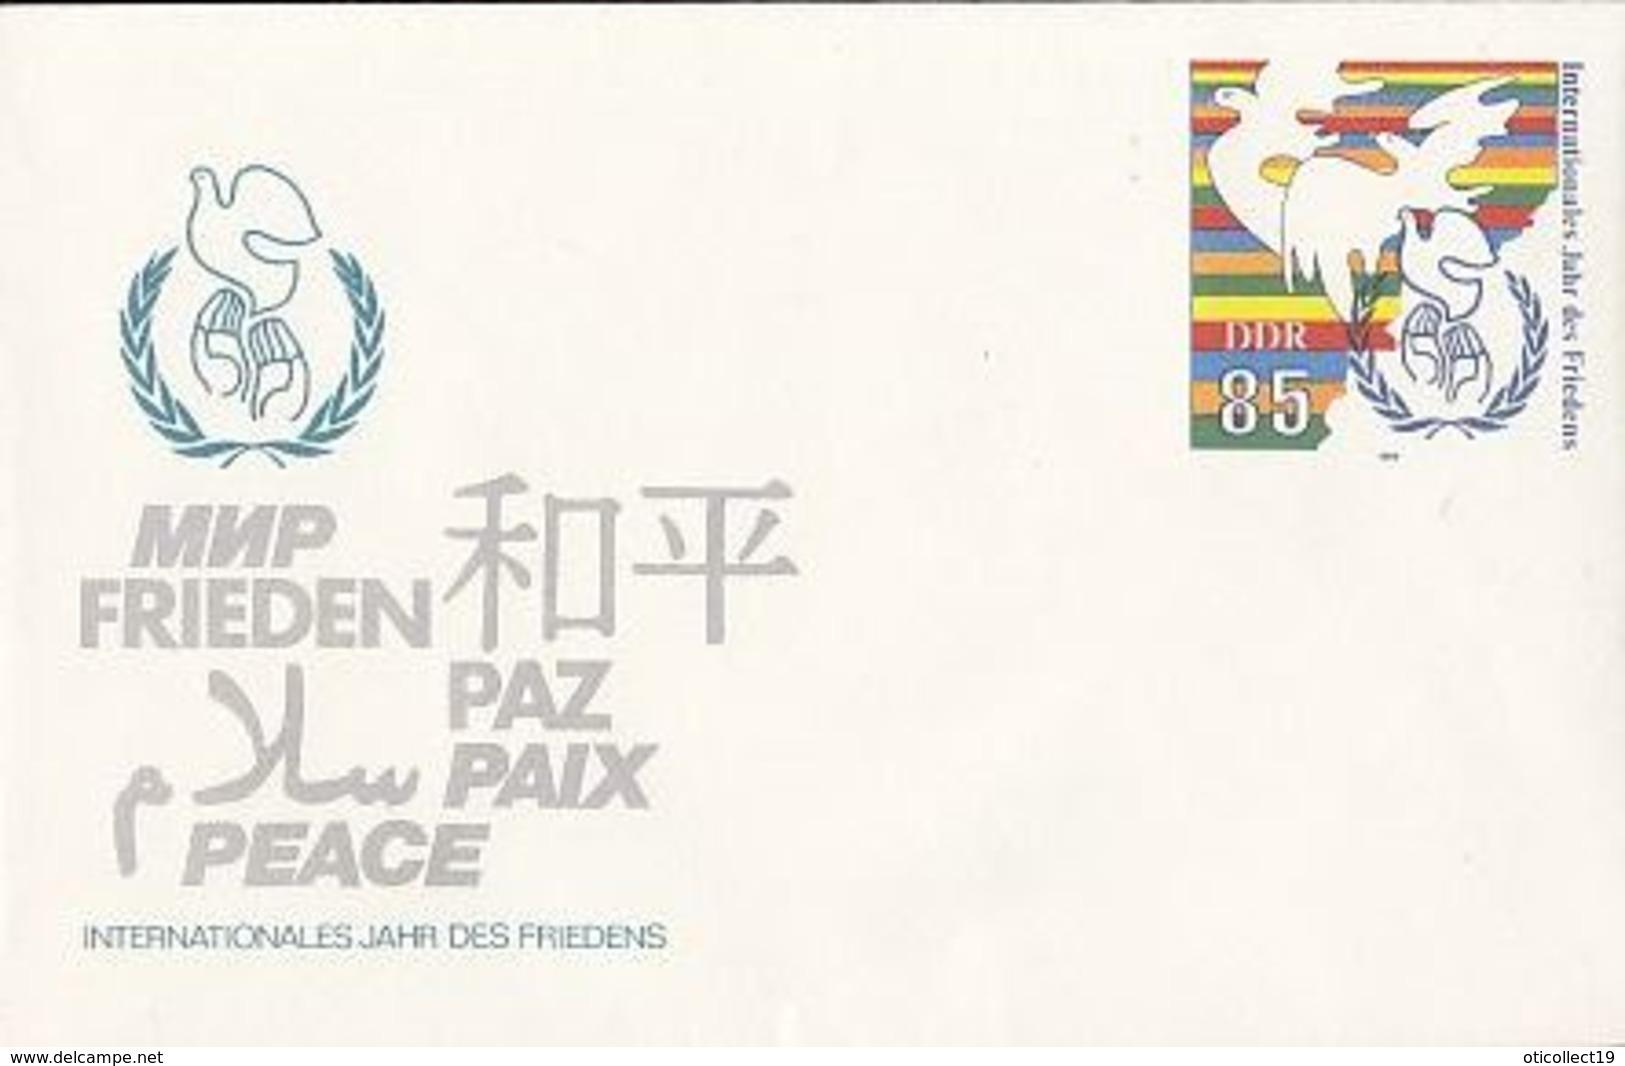 INTERNATIONAL YEAR OF FRIENDSHIP, PEACE, COVER STATIONERY, 1986, GERMANY-DDR - Enveloppes - Neuves